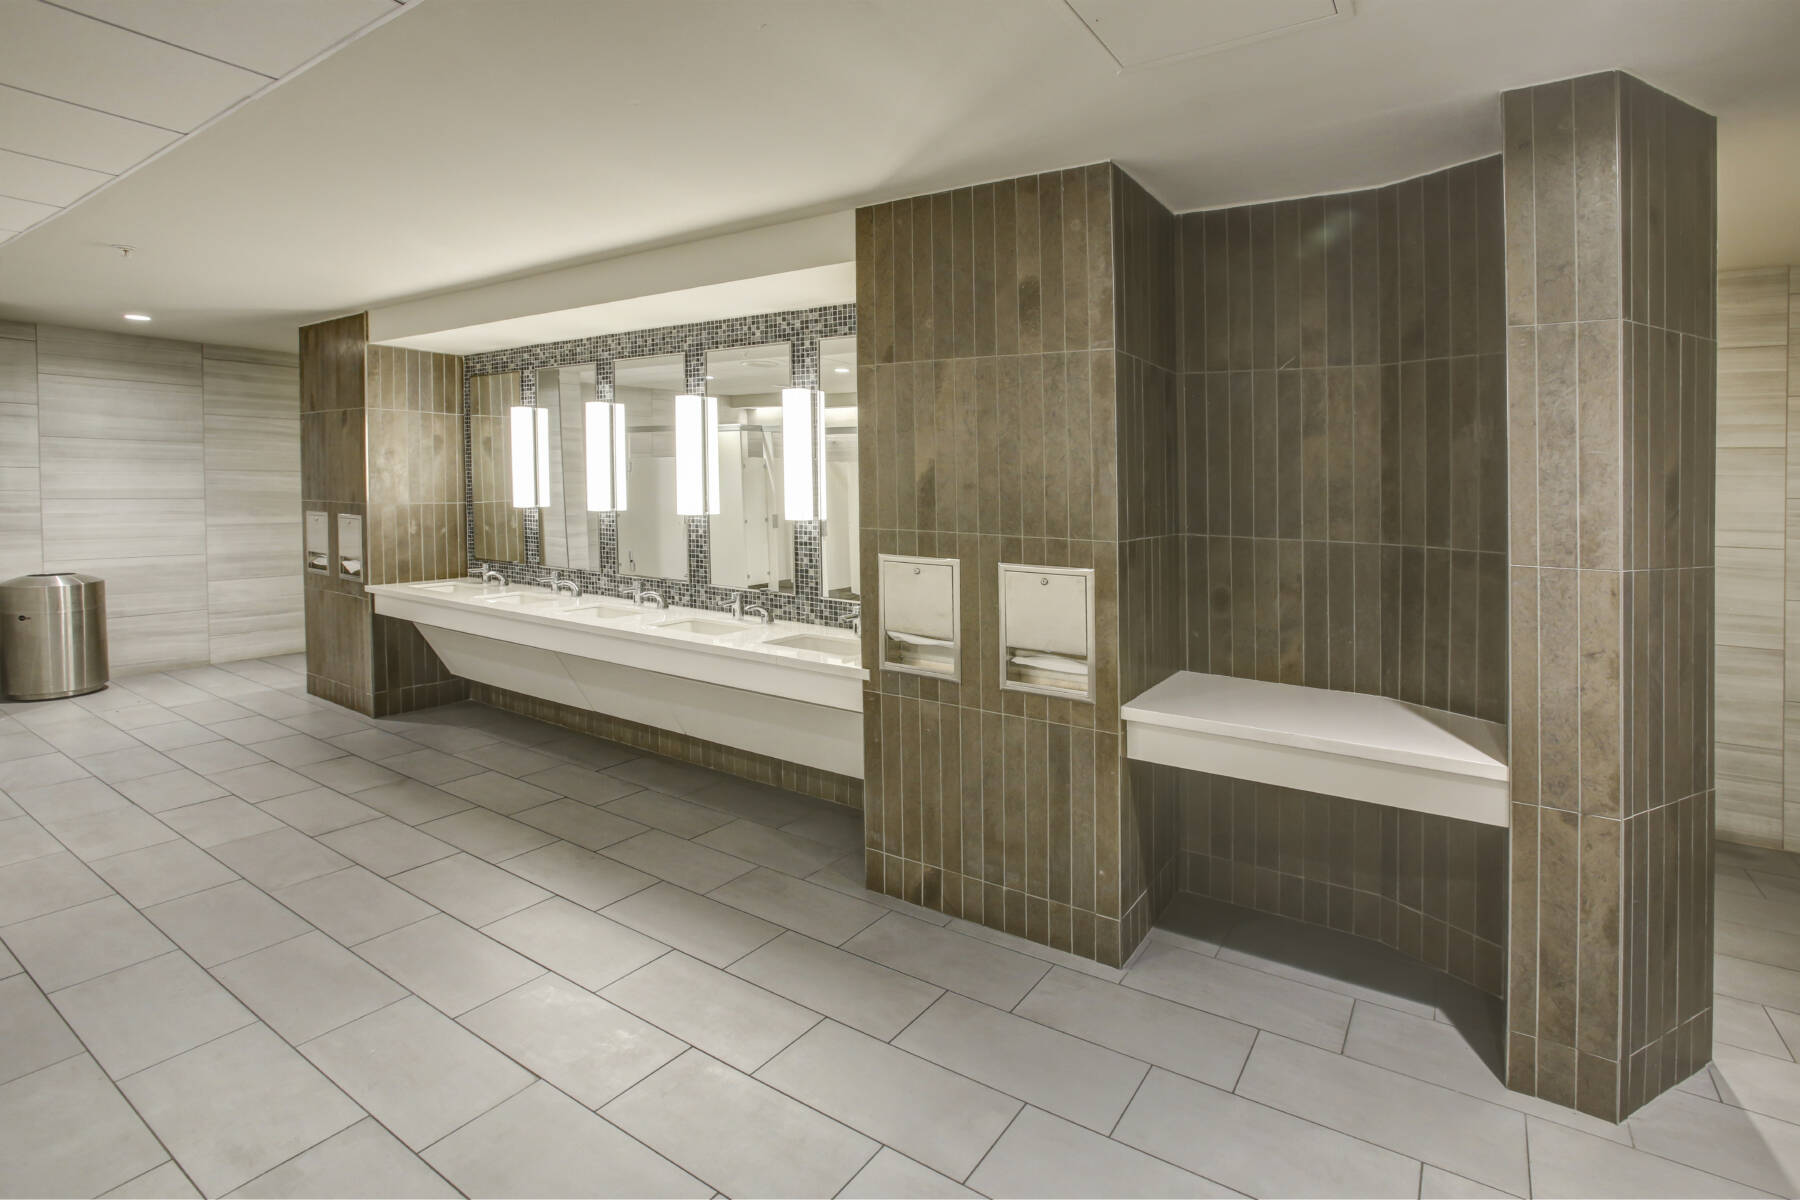 Handwashing station in a restroom with white tile flooring and brown wall tile. This image demonstrates this company's excellence in multi-purpose sports flooring installations.